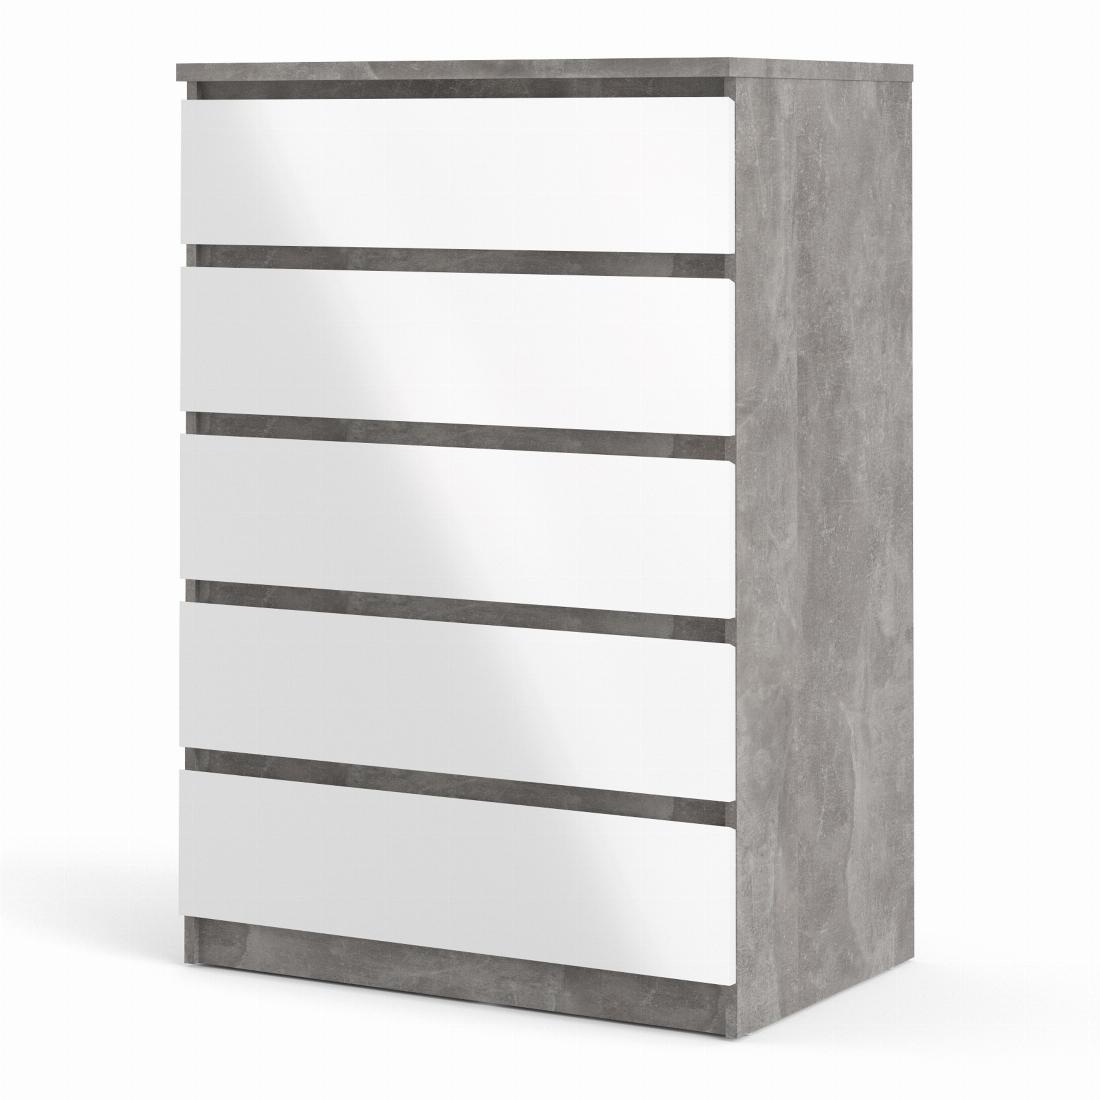 Naia Chest of 5 Drawers in Concrete and White High Gloss